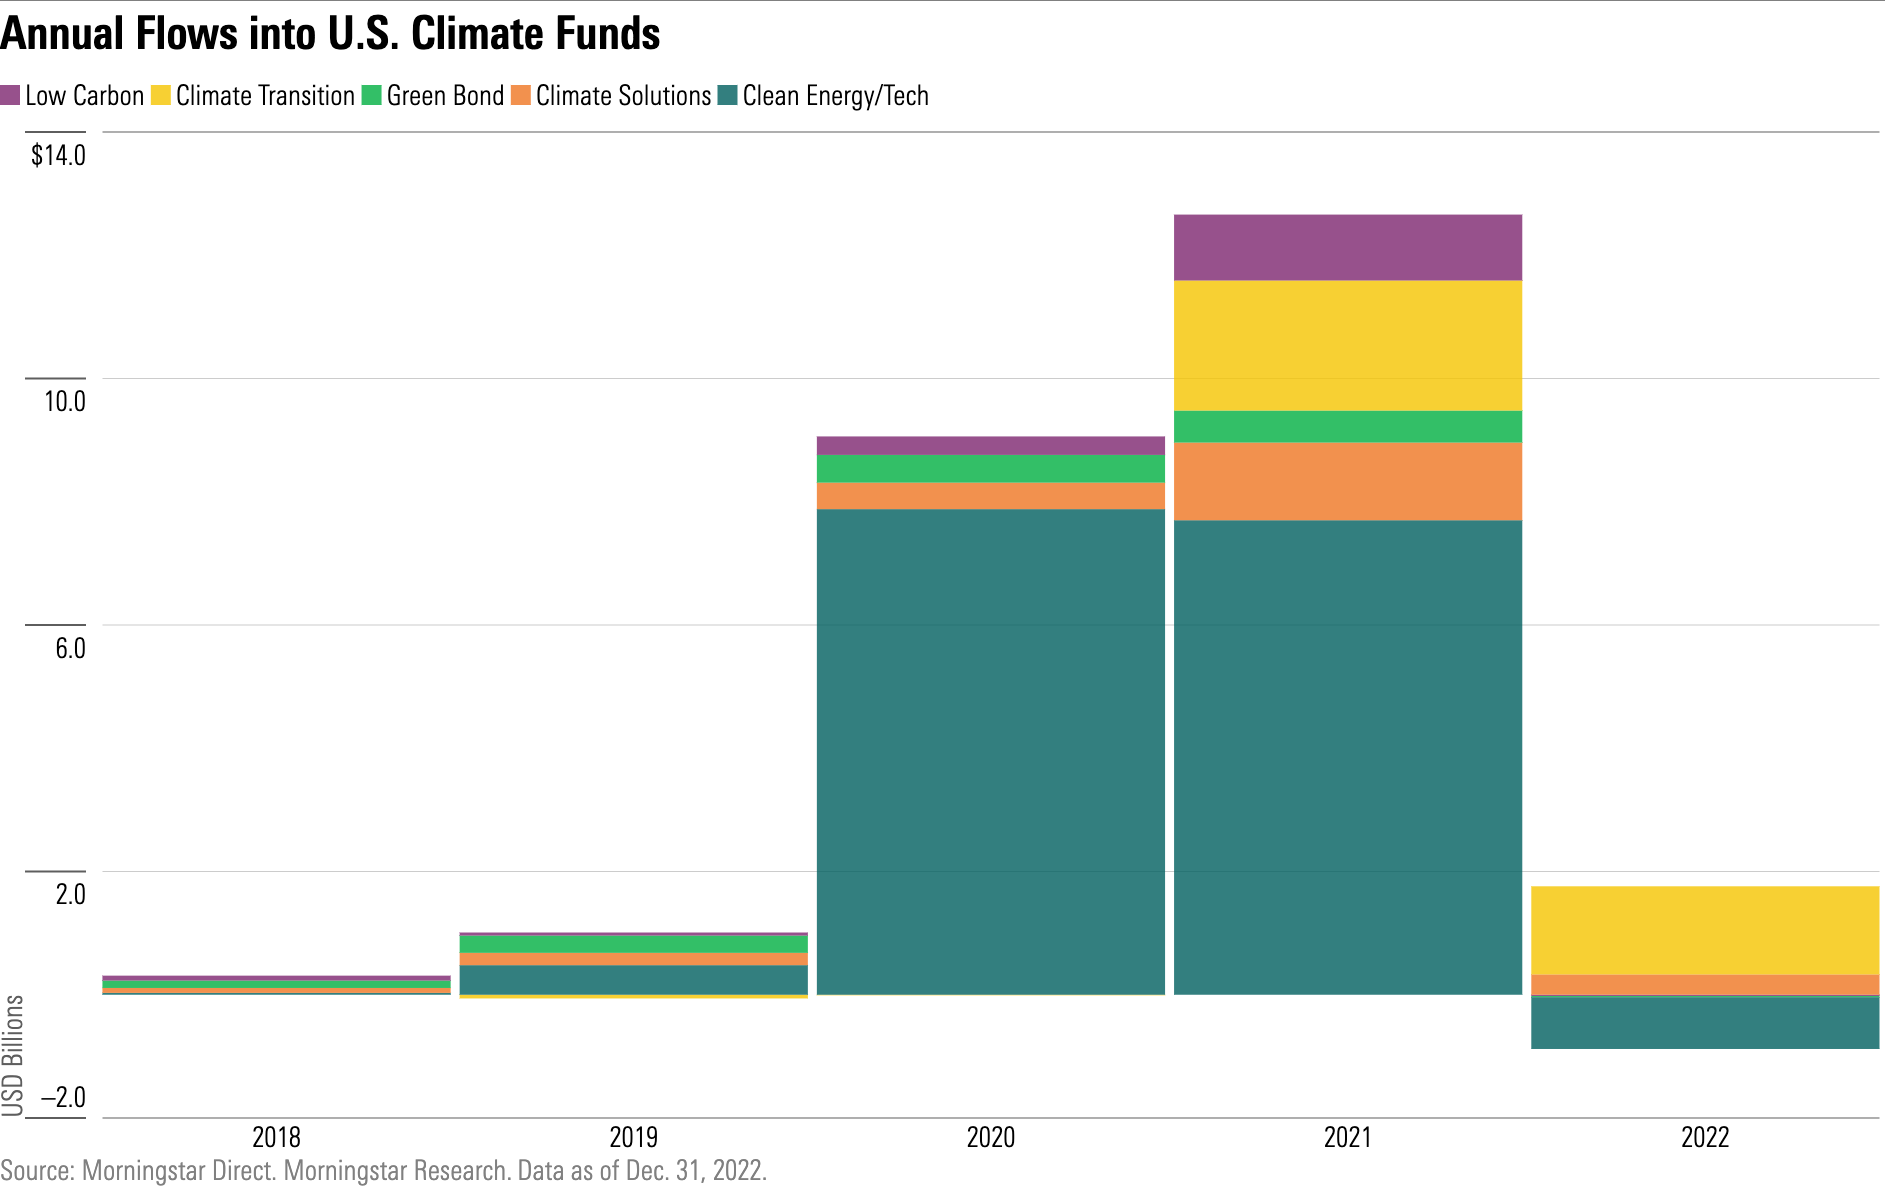 Stacked bar chart showing the rise and fall of flows into U.S. climate funds between 2018 and 2022.